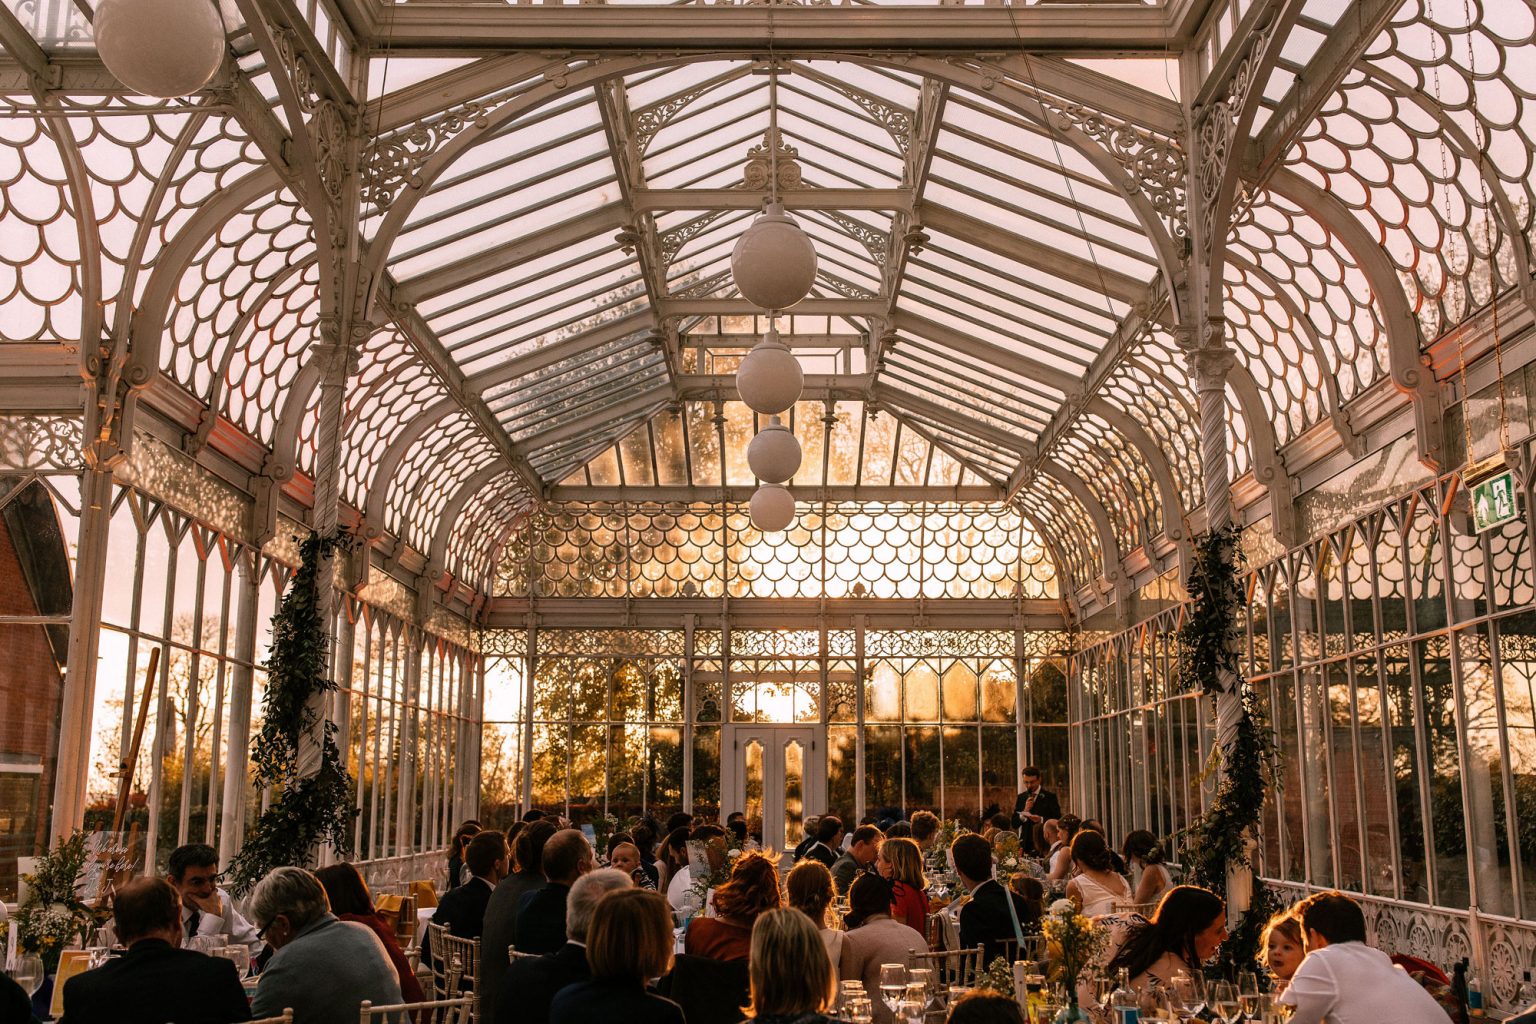 The interior of a Victorian glass conservatory, filled with people for a reception.